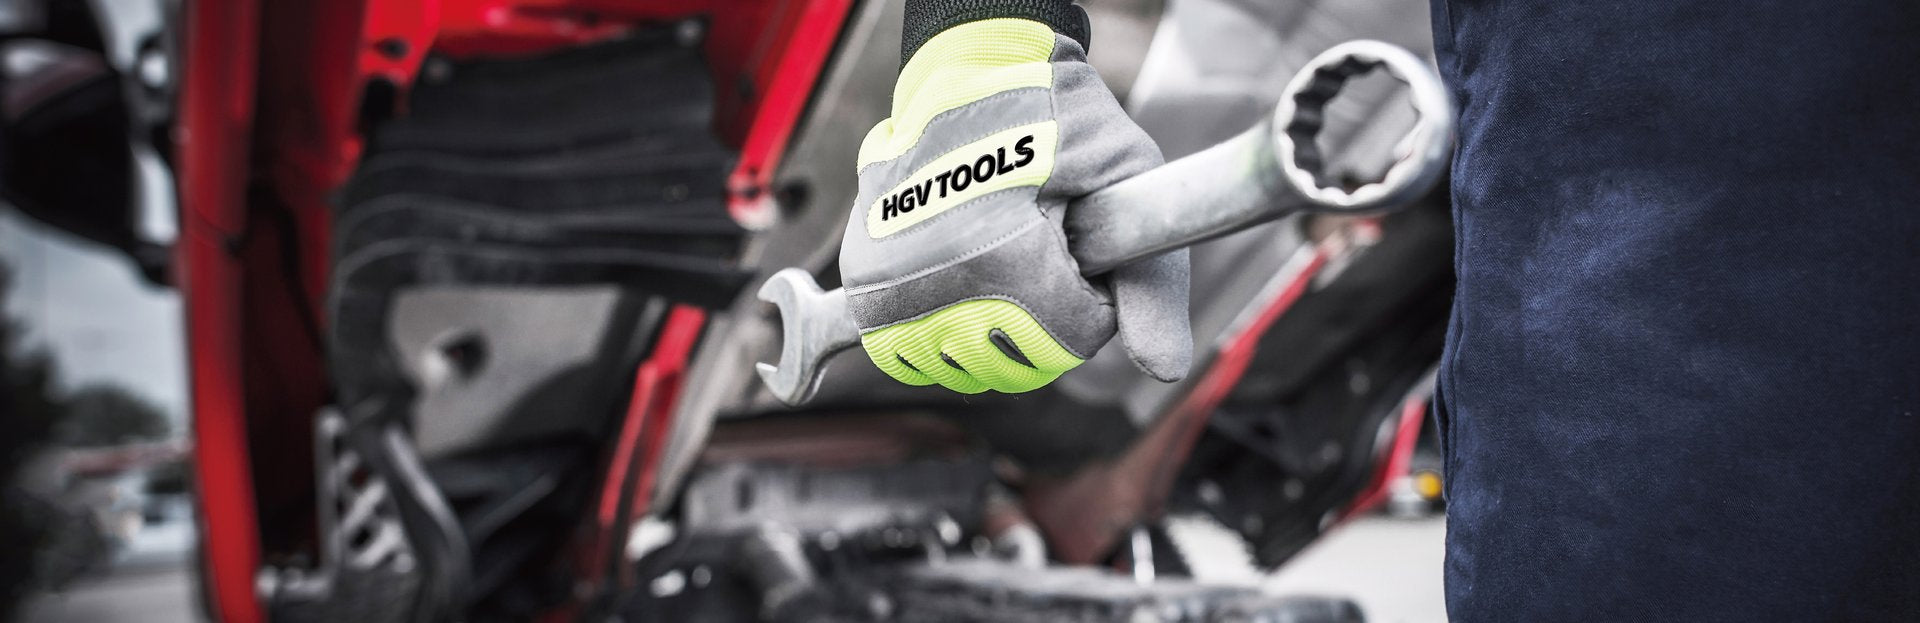 Special tools for cars and HGVs